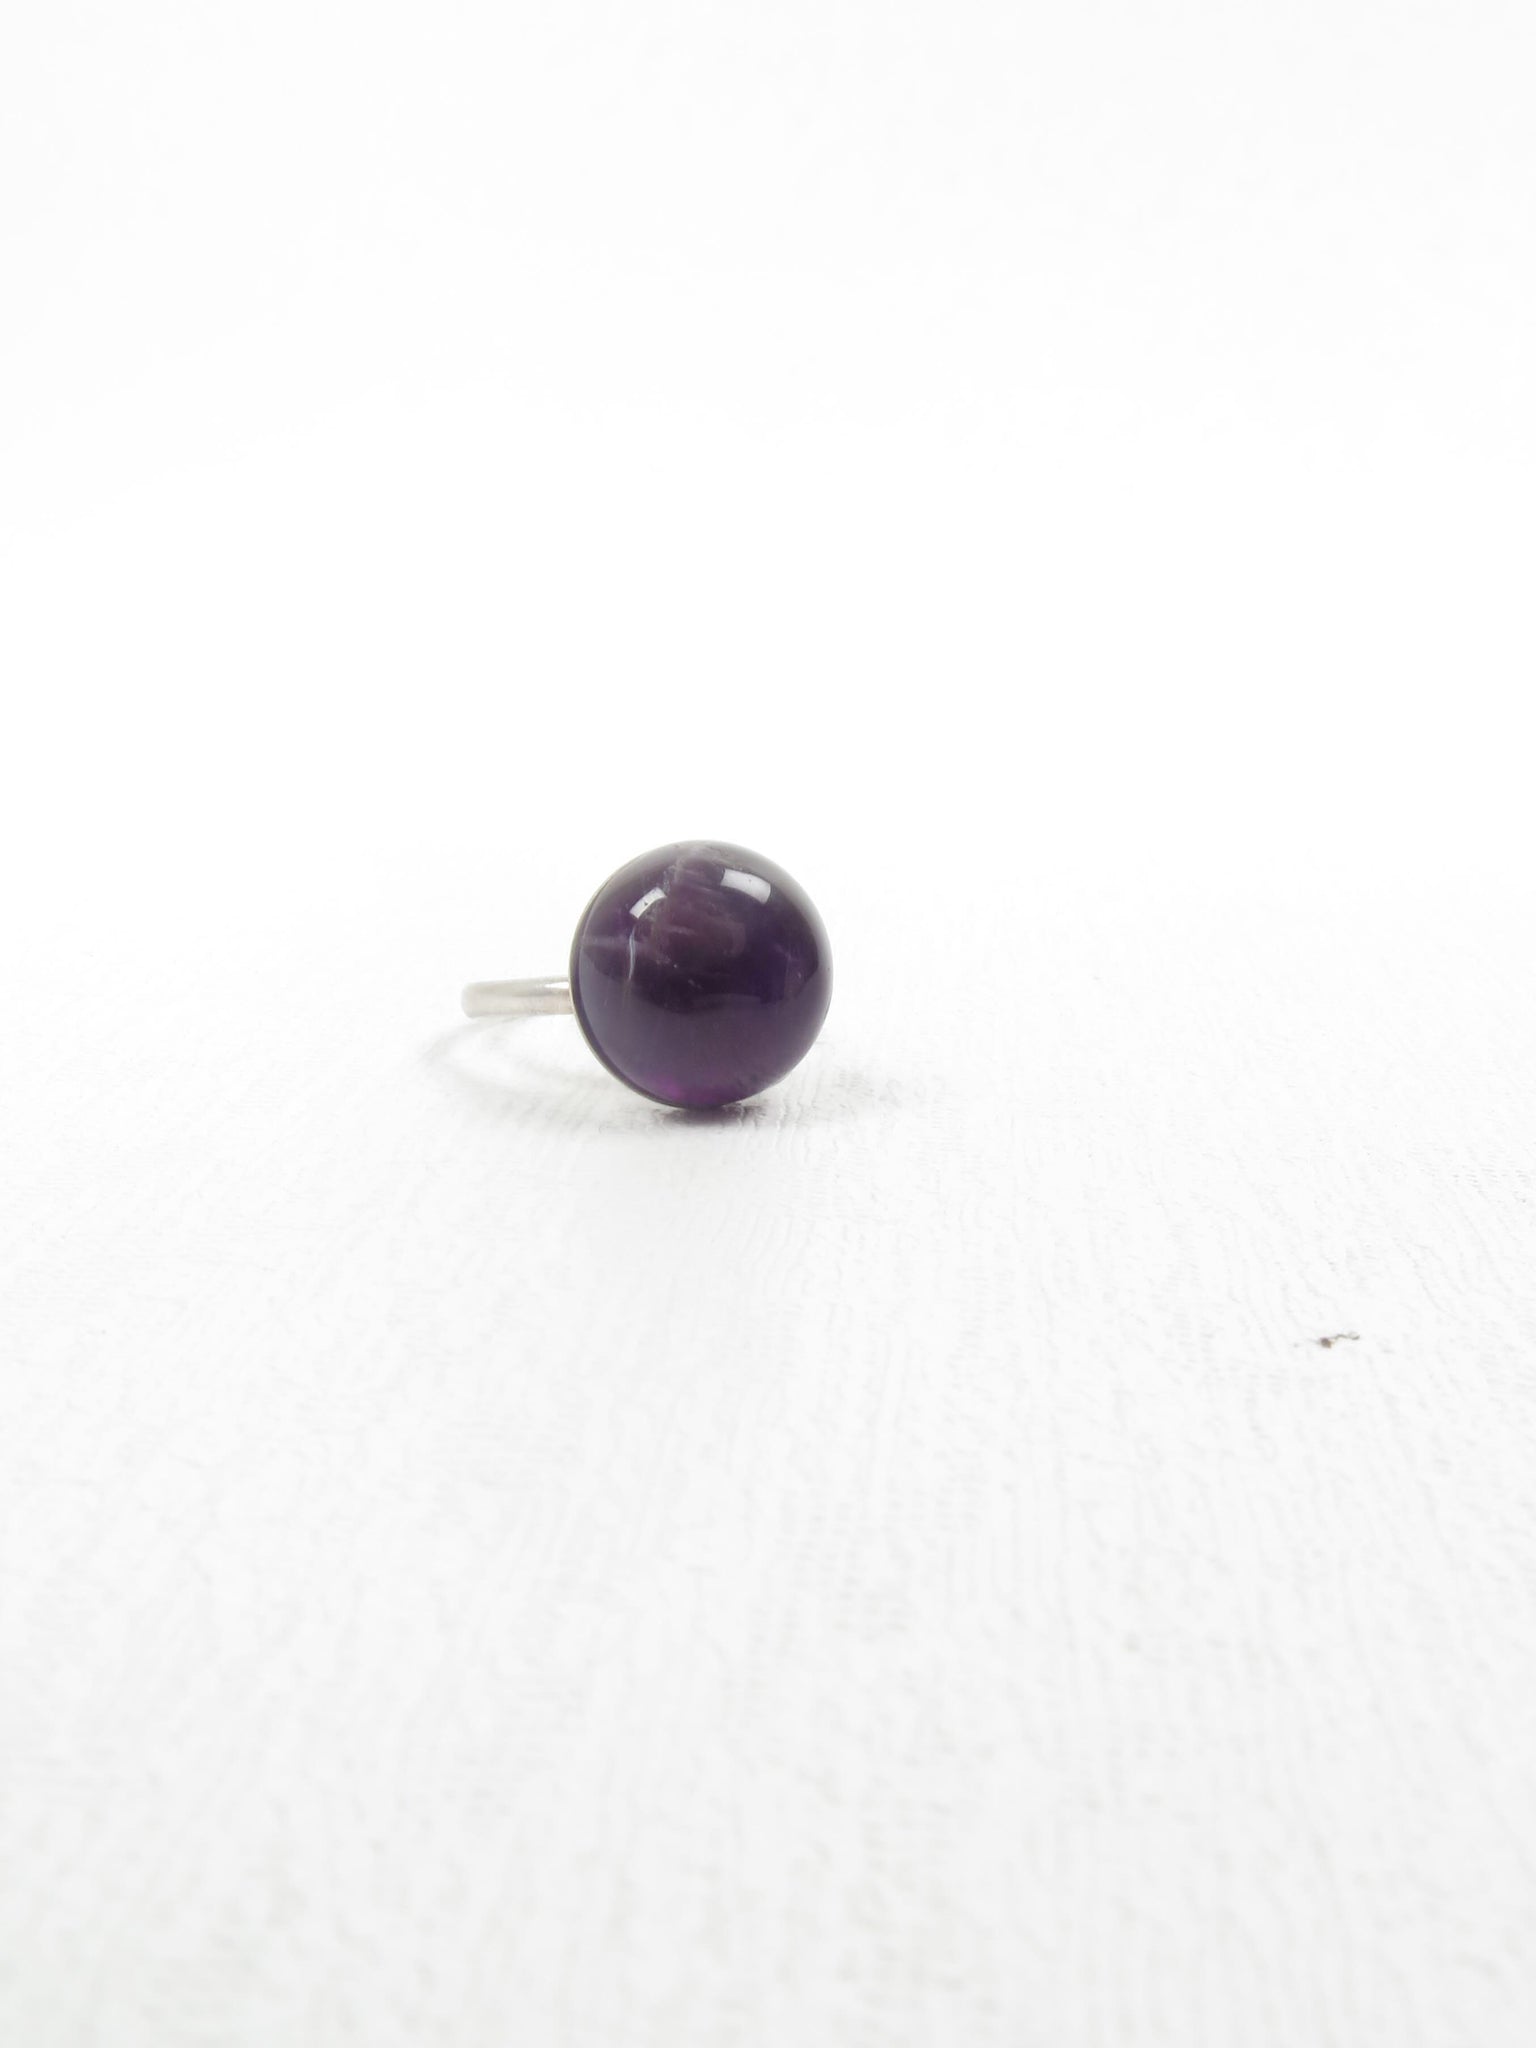 Vintage Style Amethyst & Silver Ring Size O - The Harlequin